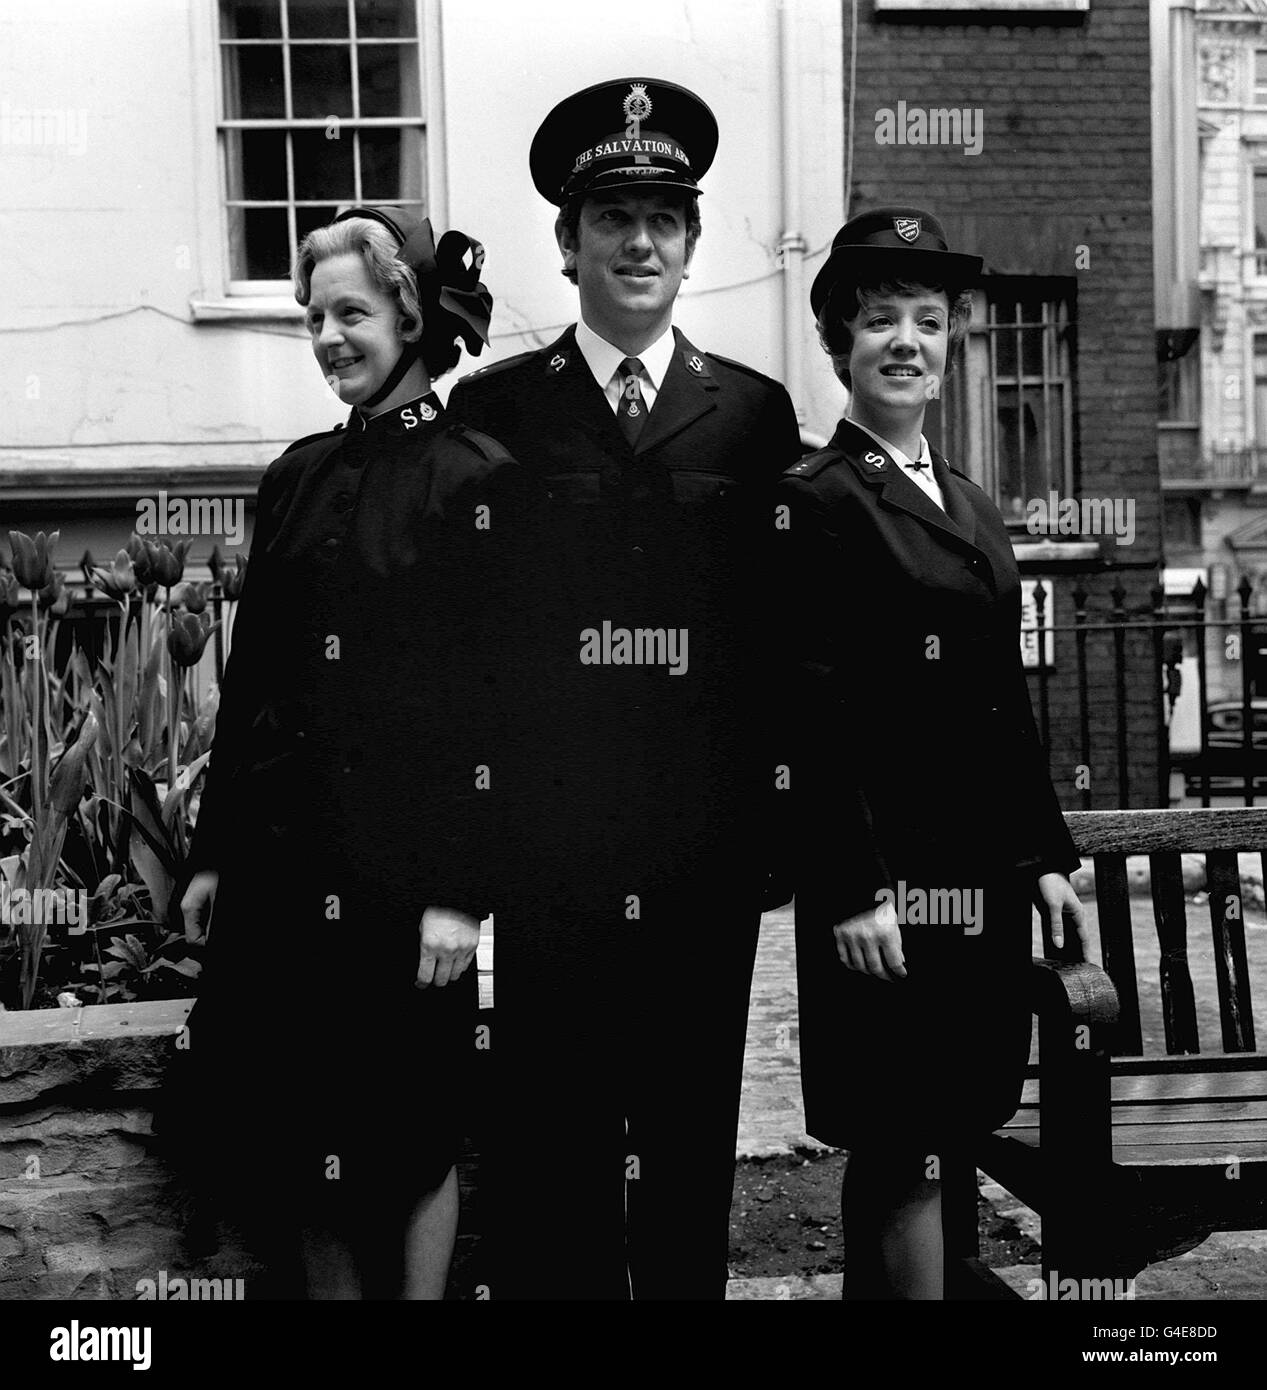 PA NEWS PHOTO 12/5/70 CAPTAIN PETER DALZIEL AND HIS WIFE IN ST BRIDES CHURCHYARD. LEFT IS MAYOR KATH BENN IN THE OLD UNIFORM OF THE SALVATION ARMY Stock Photo